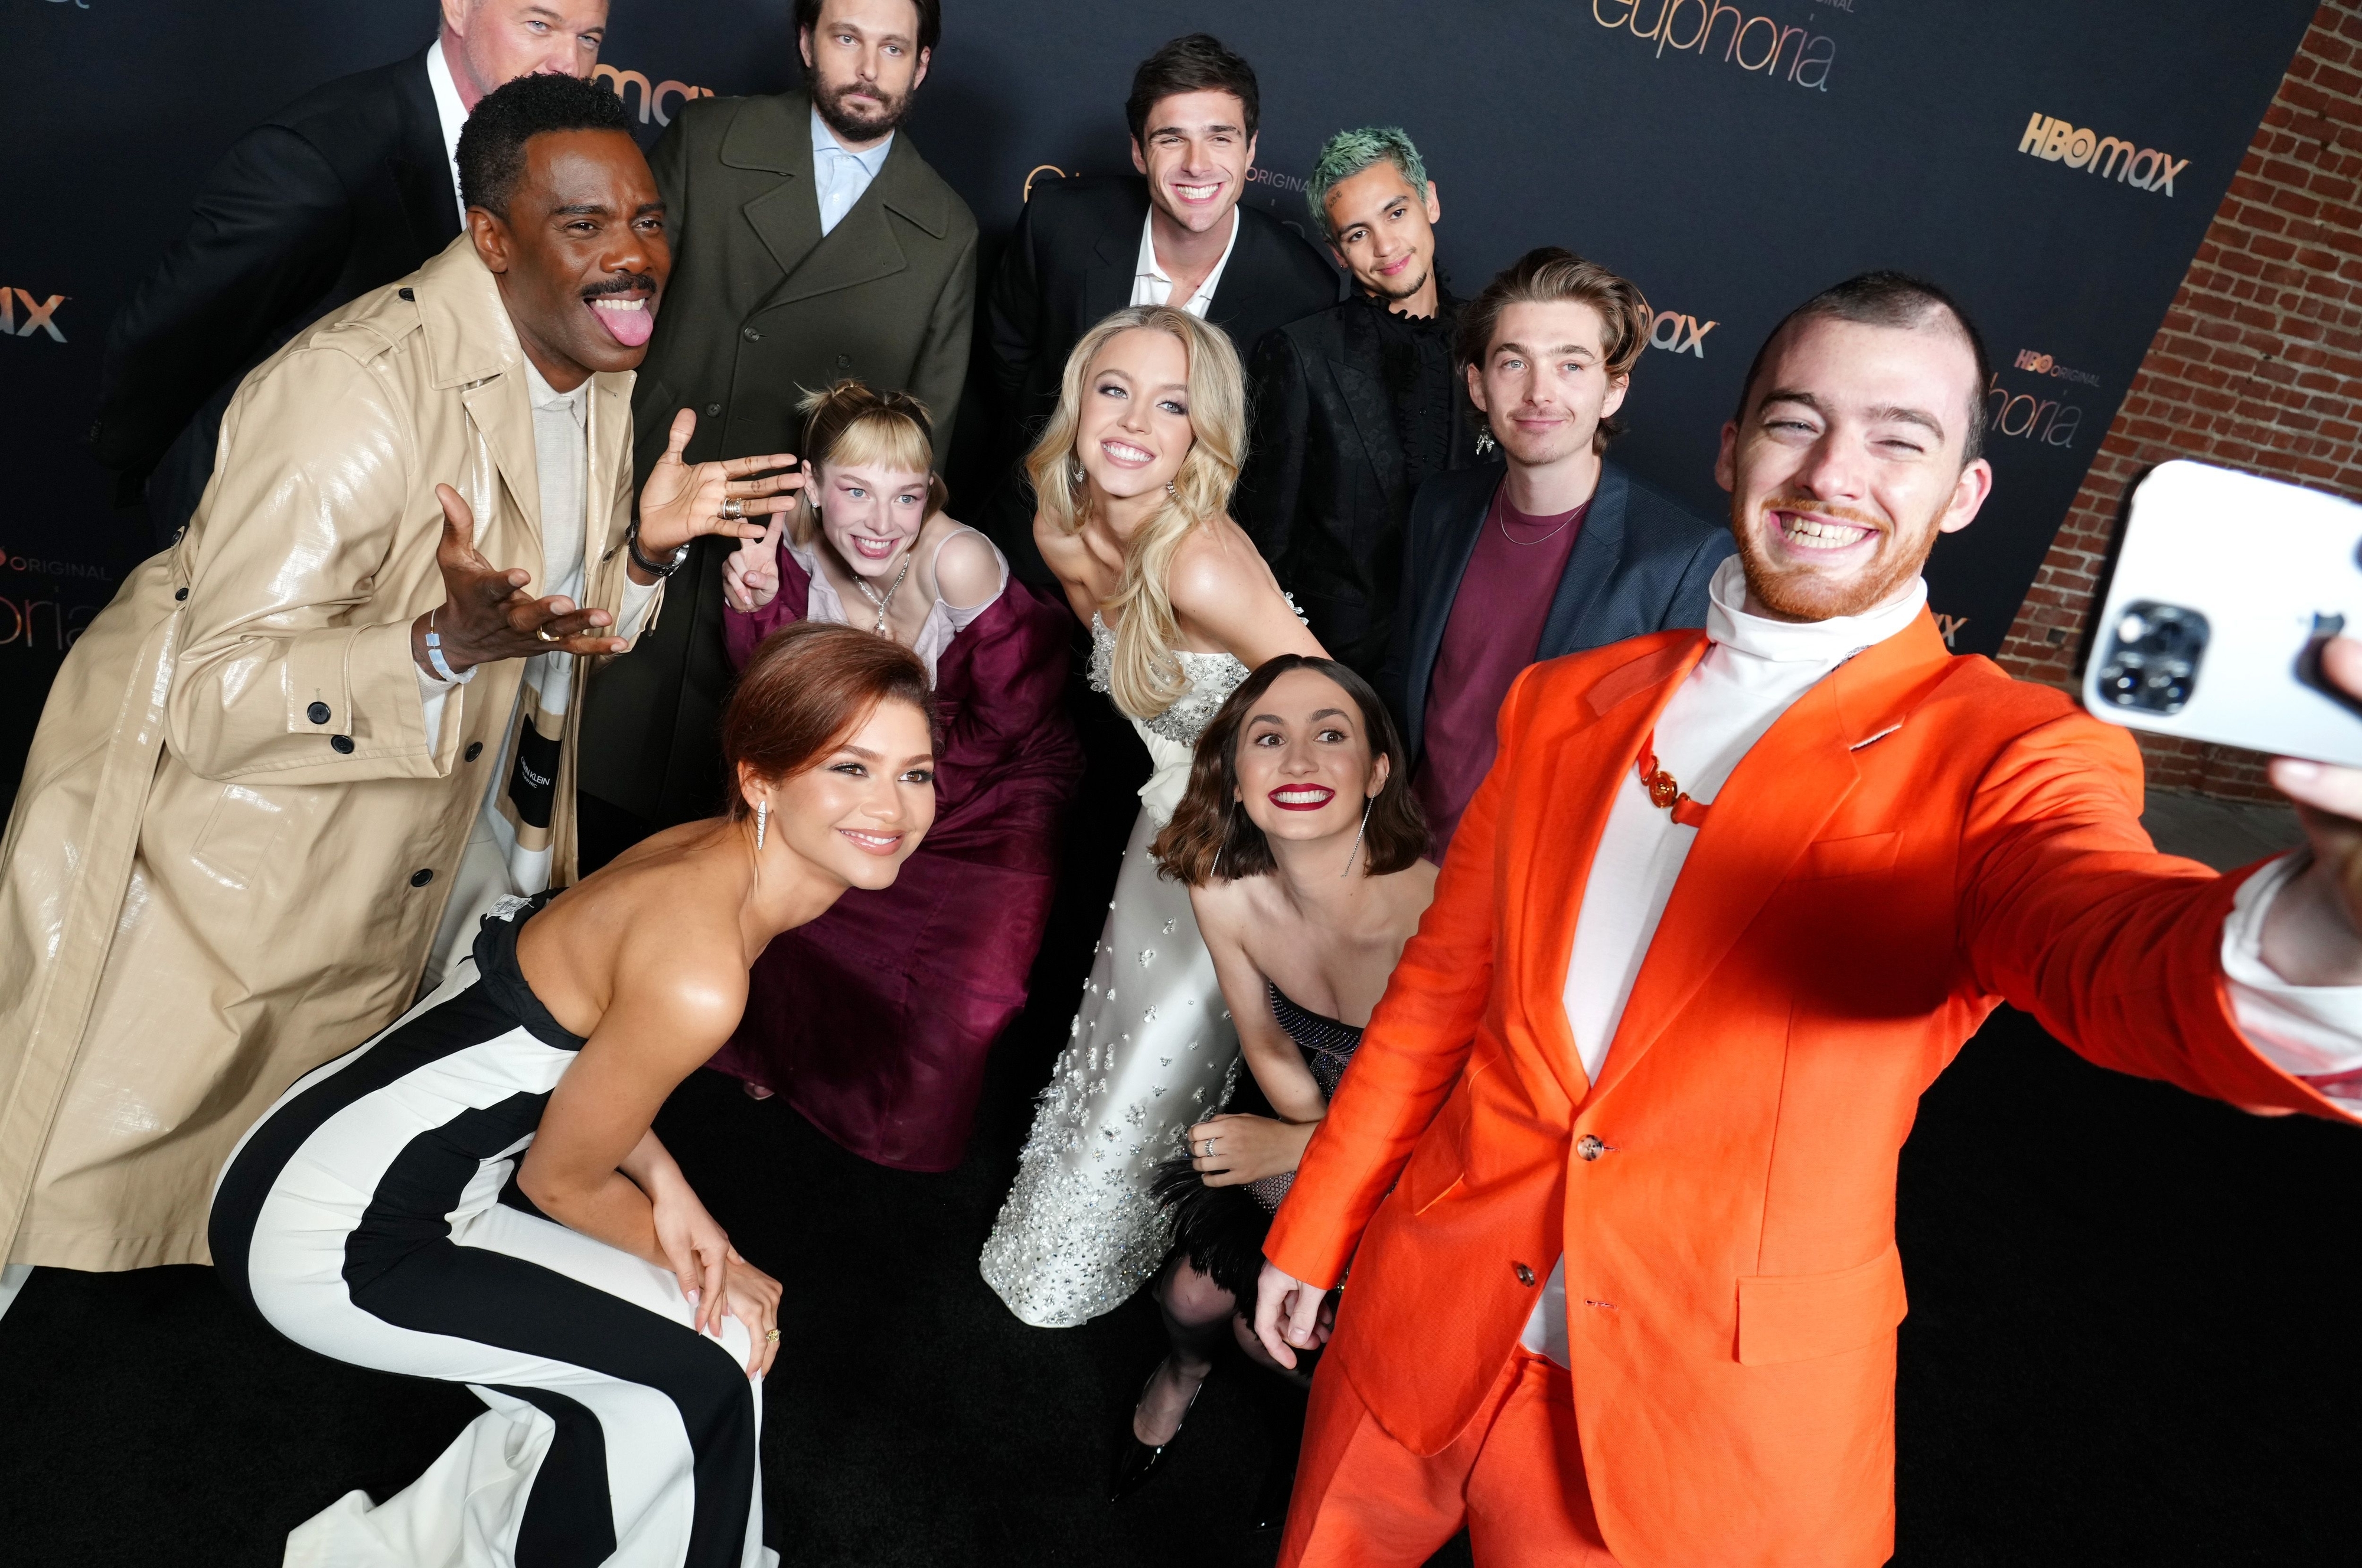 Cast members of Euphoria along with Sam Levinson at a media event taking a selfie